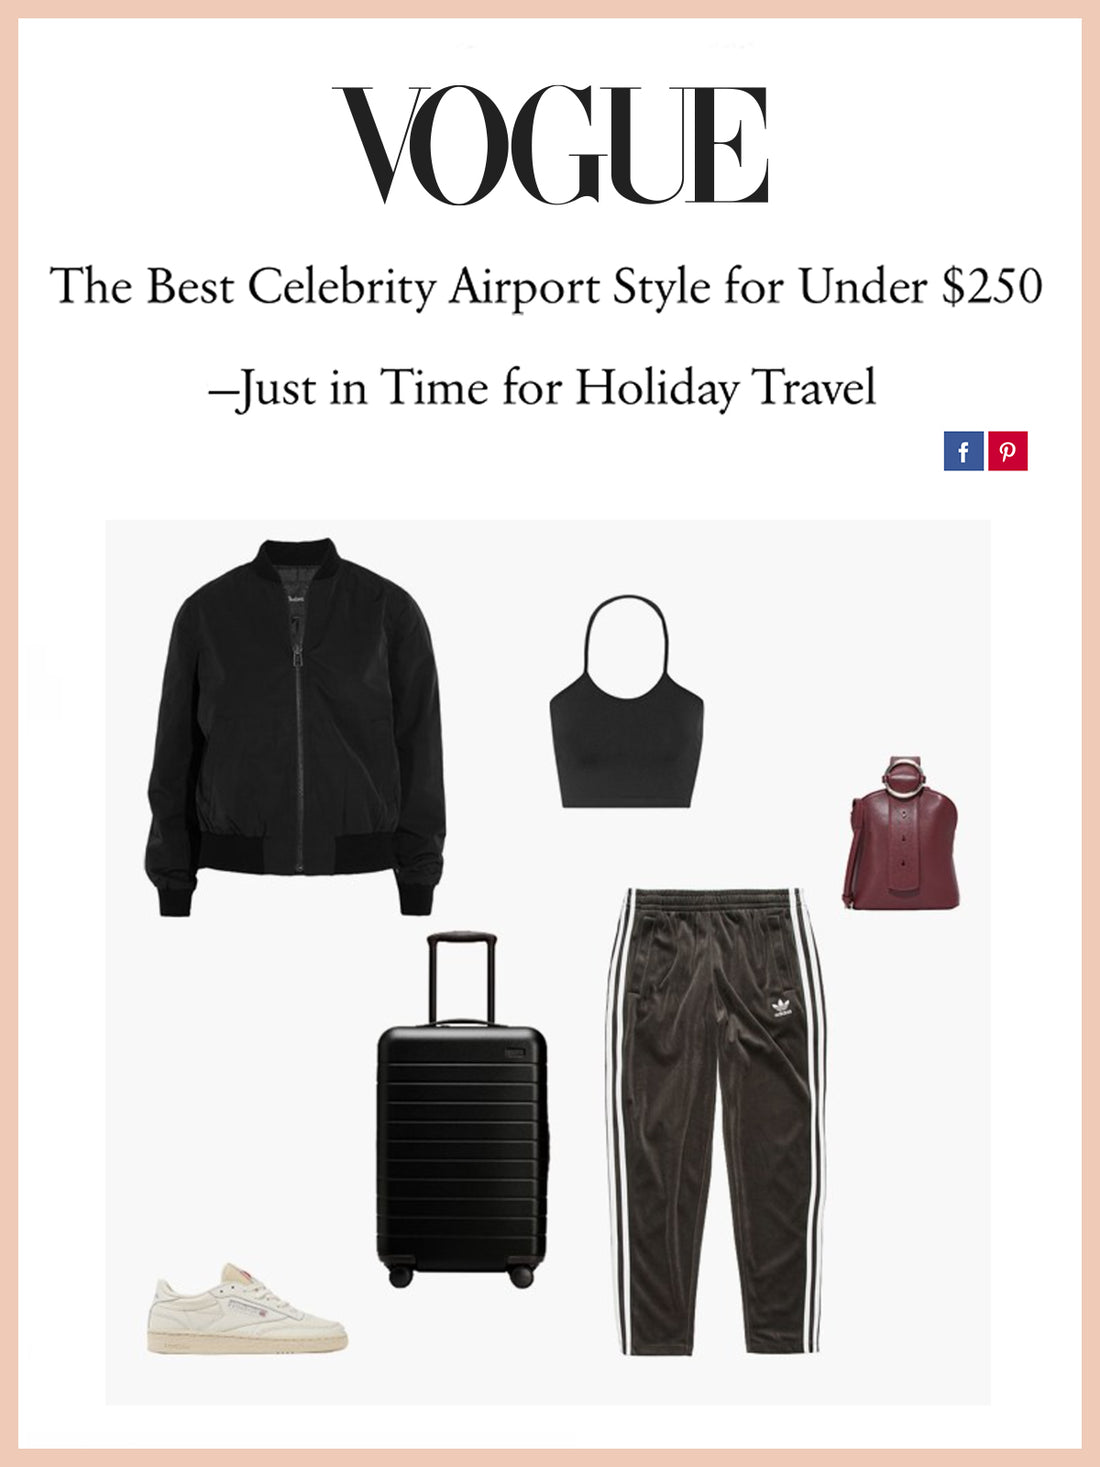 VOGUE, The Best Celebrity Airport Style for Under $250